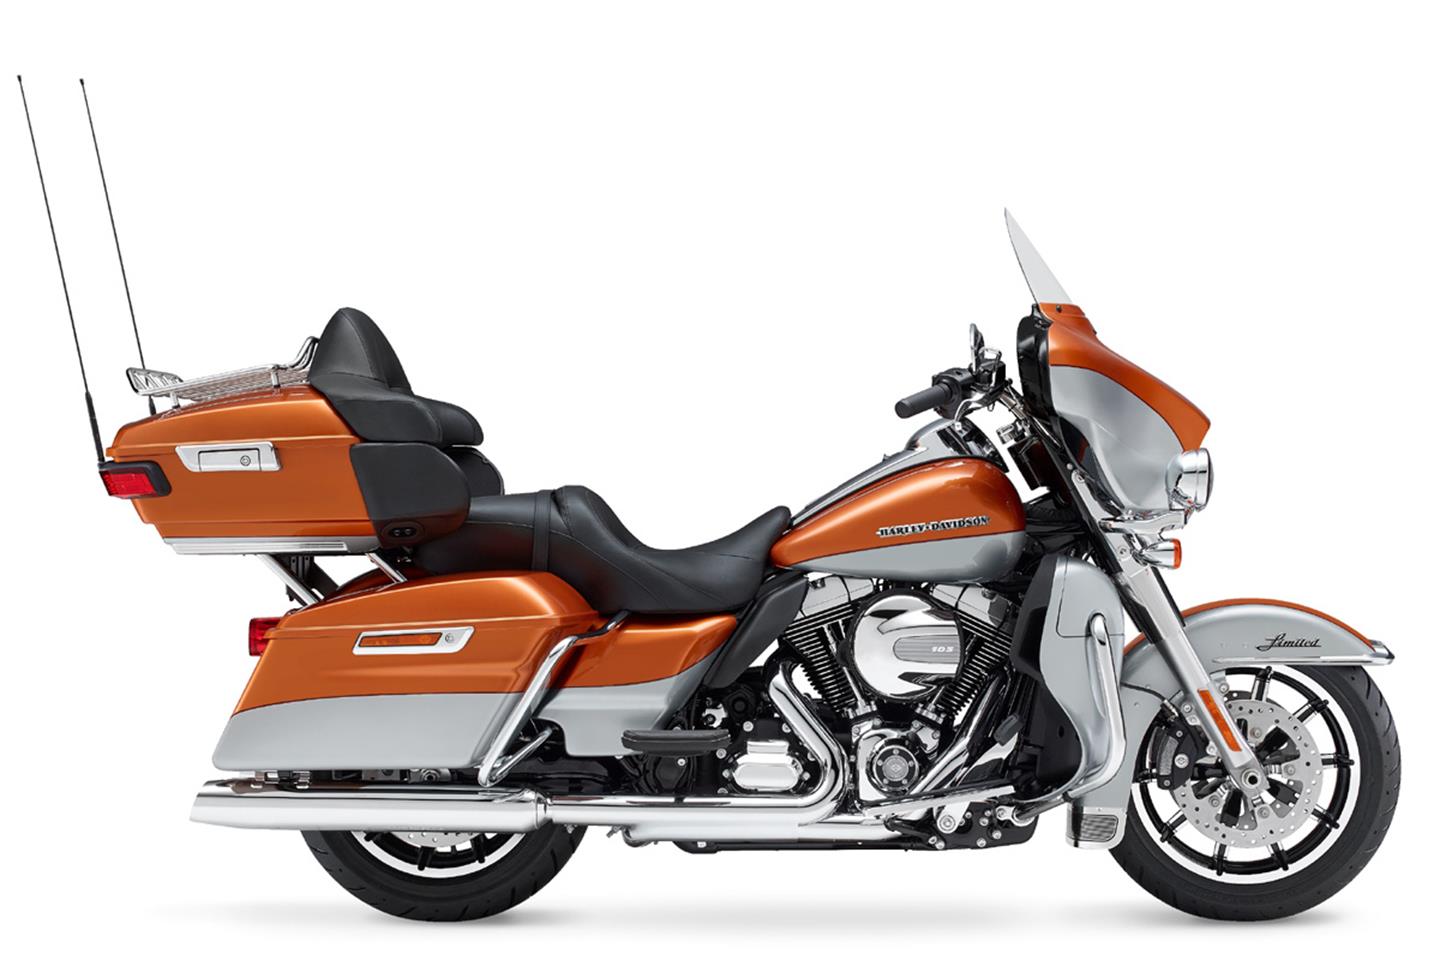 Harley recall now includes UK models MCN